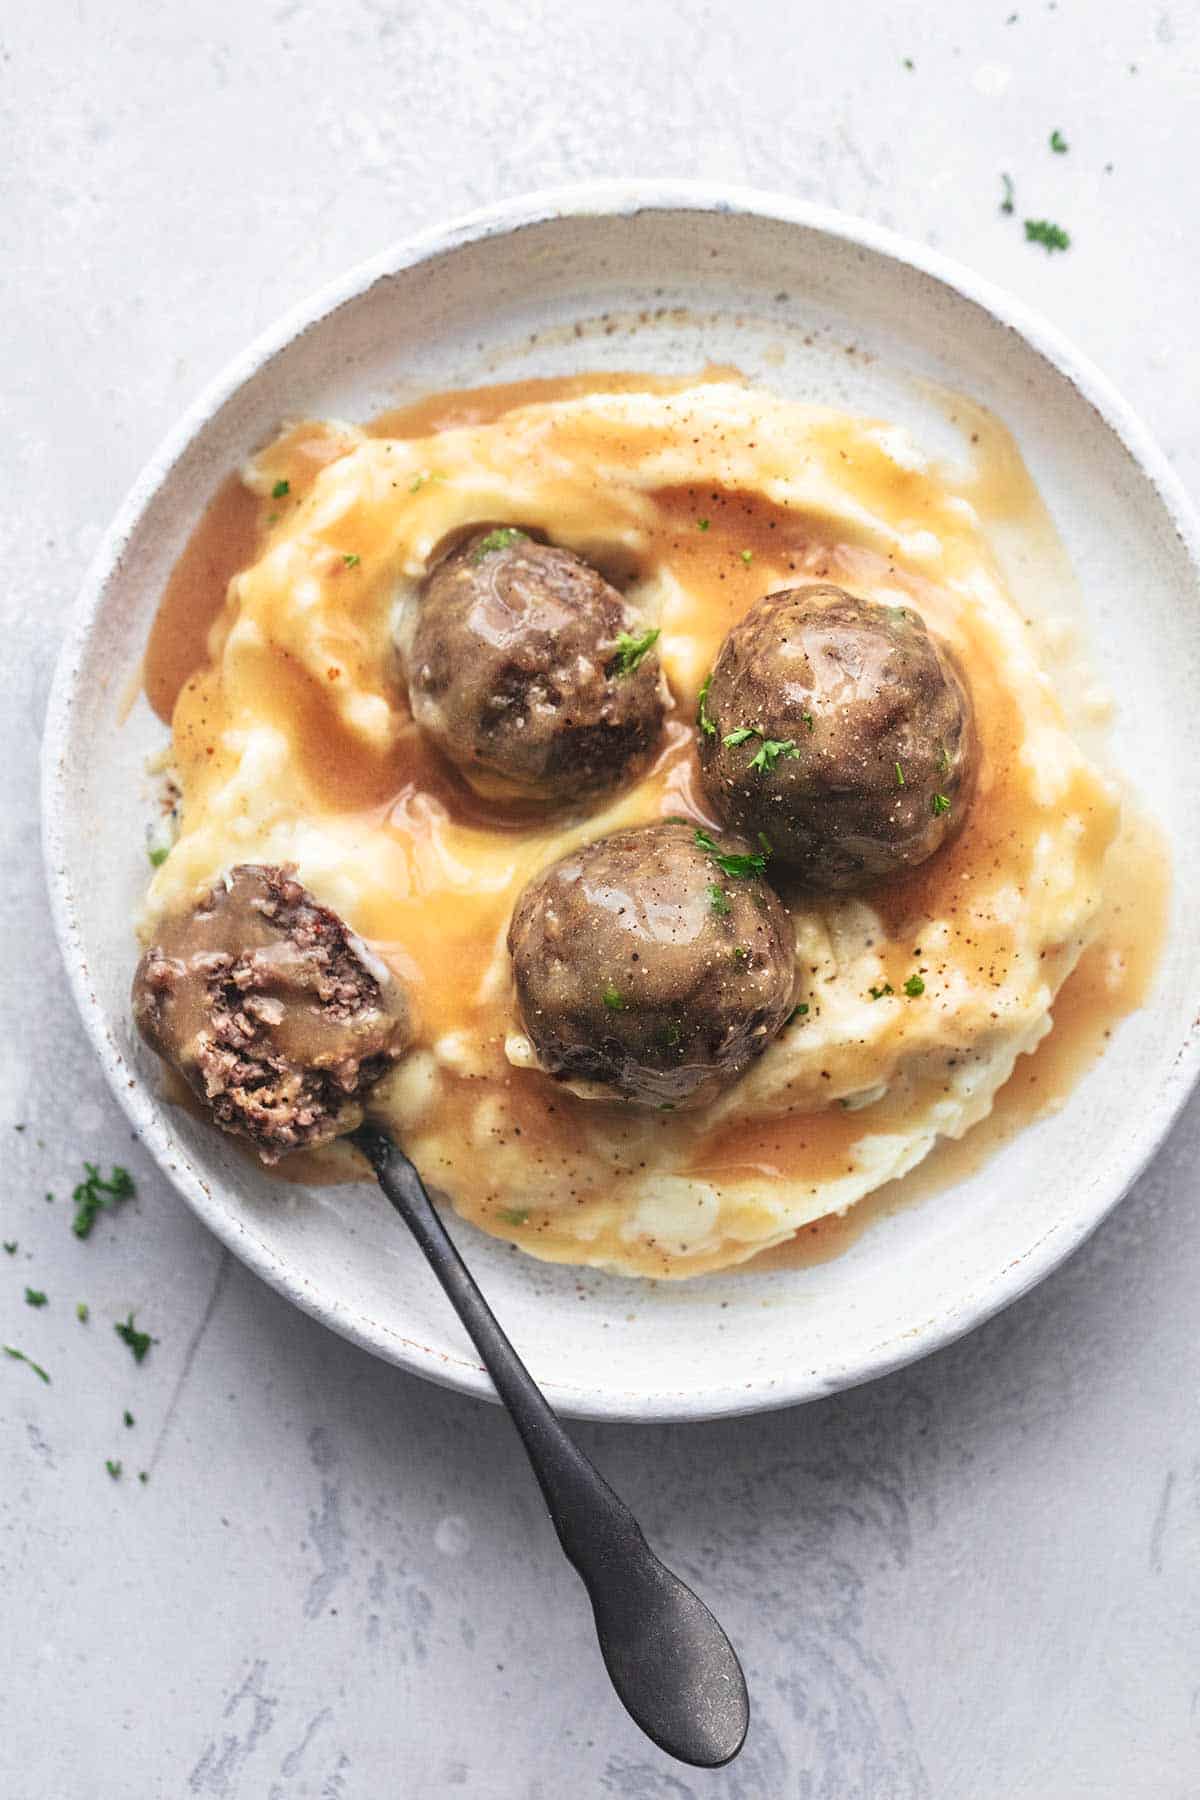 meatballs with mashed potatoes on a plate overhead